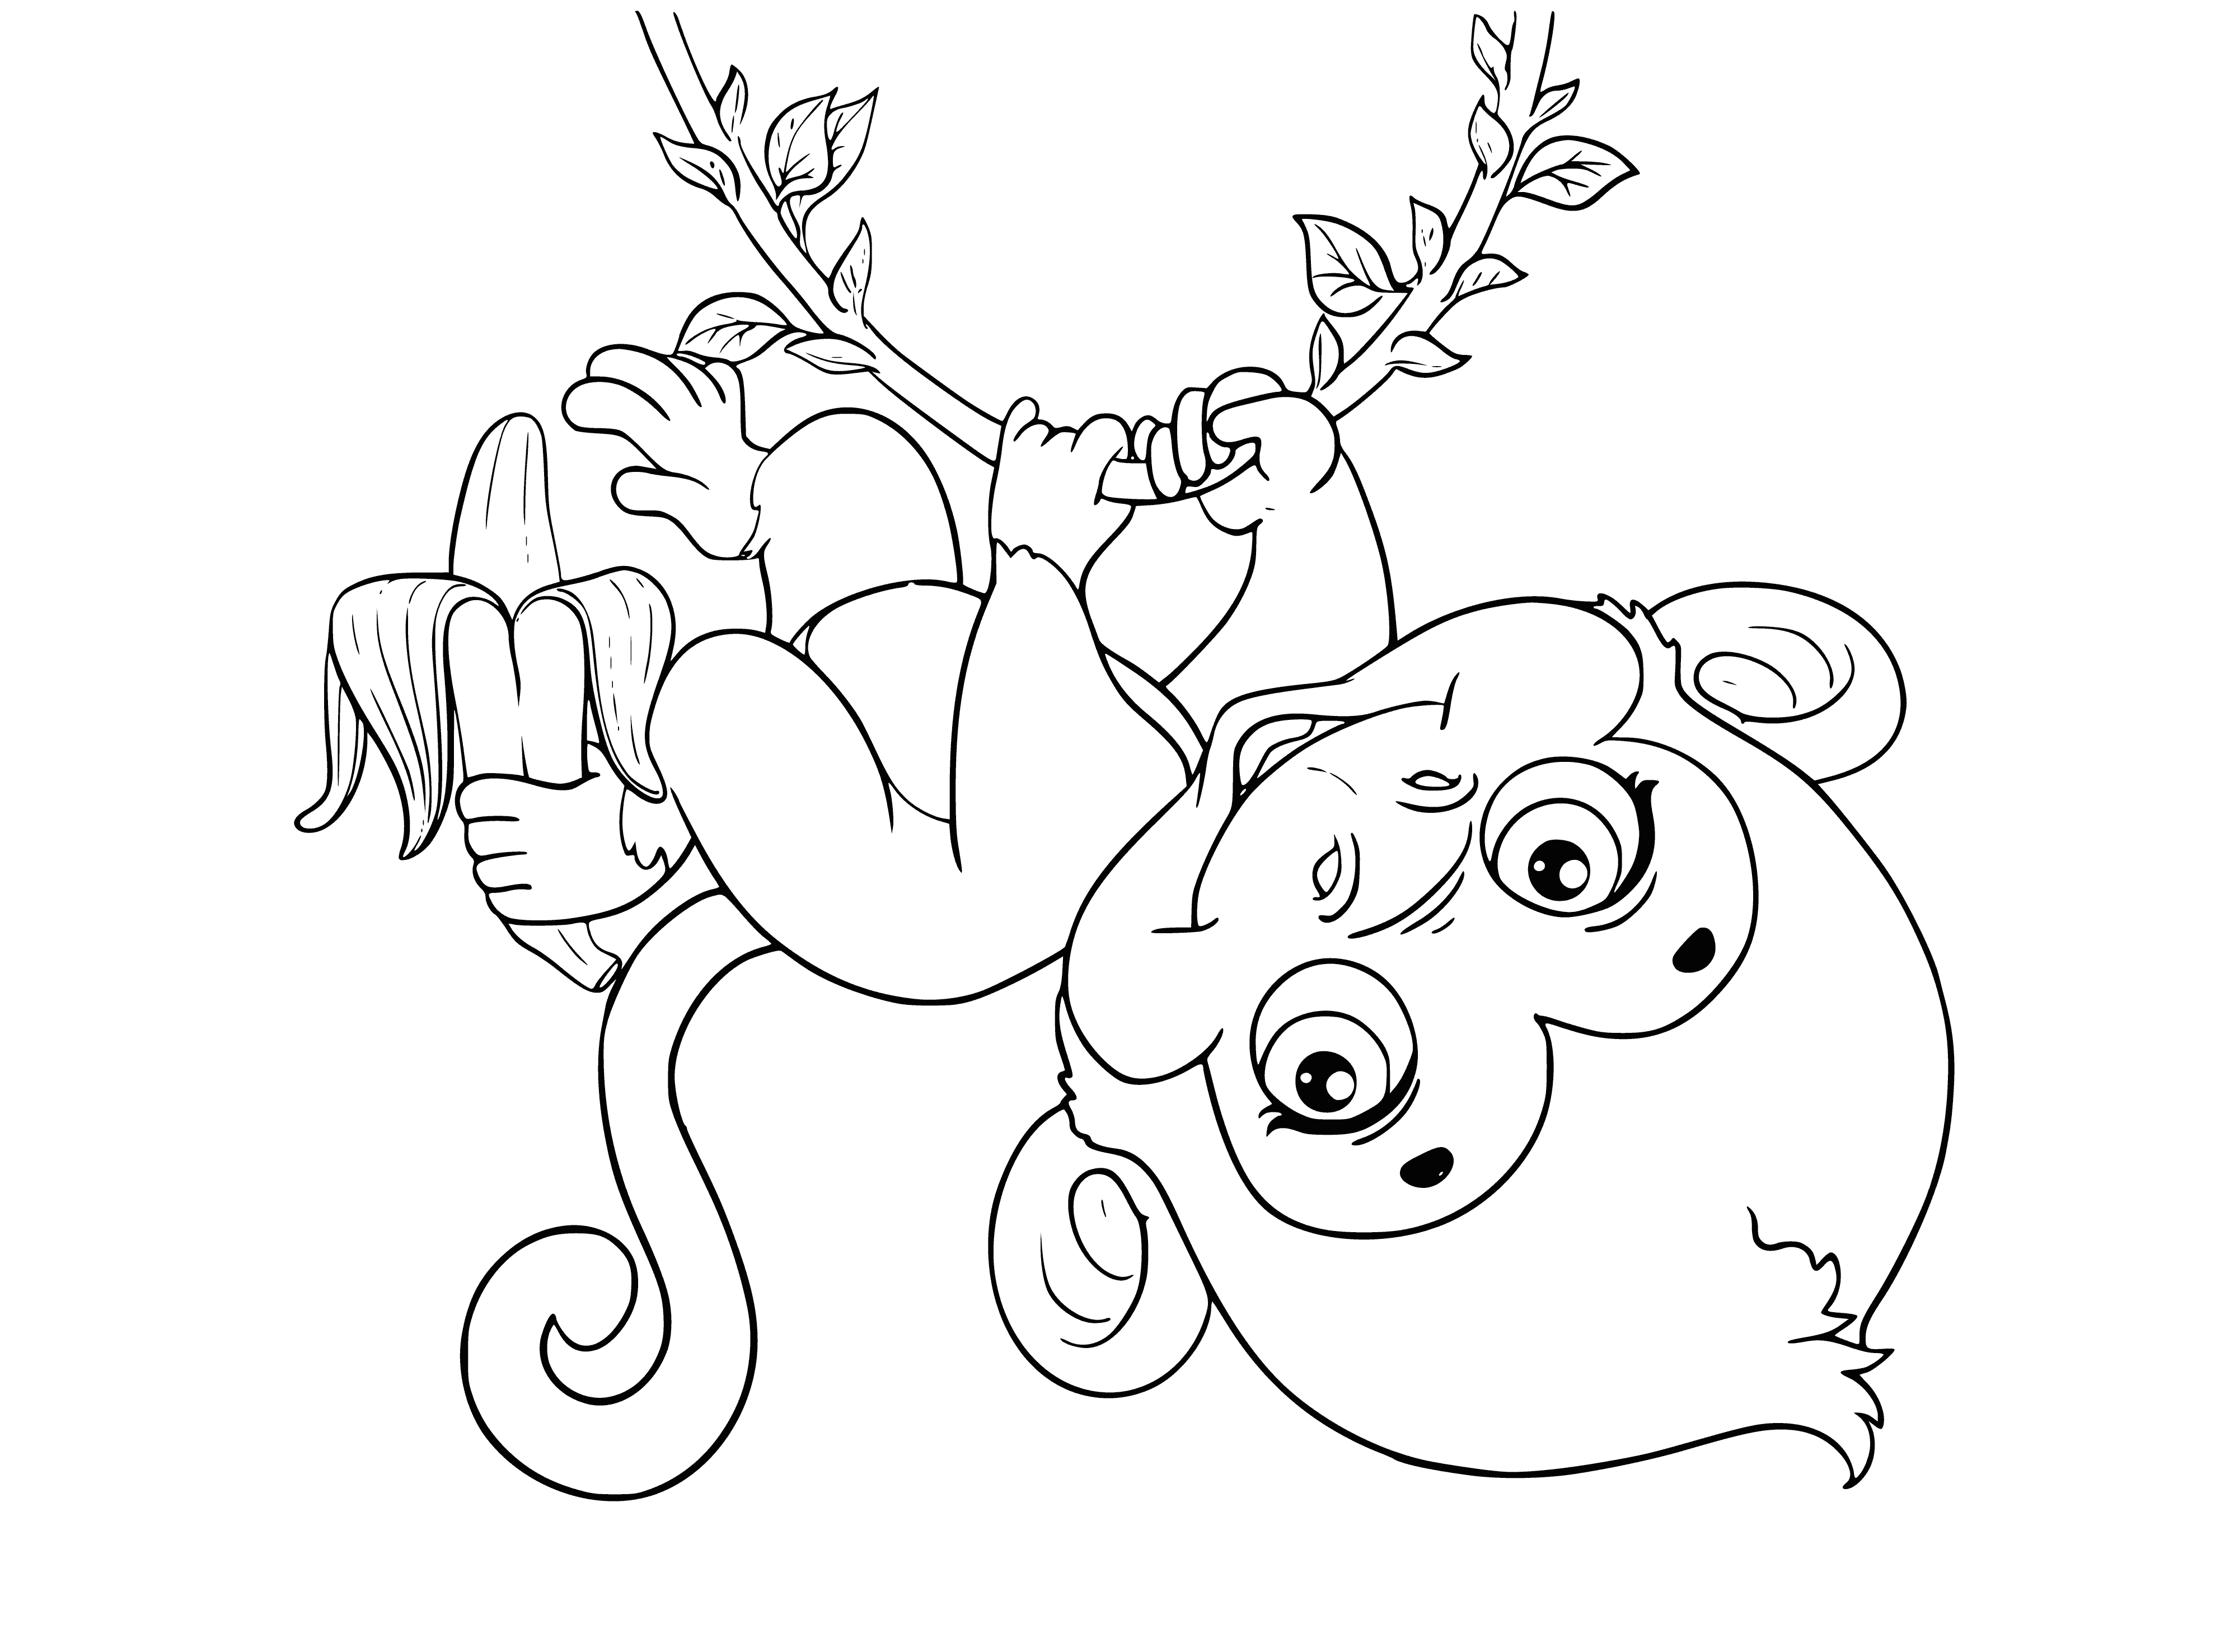 coloring page: Monkey hangs from branch, long tail, looking to side.